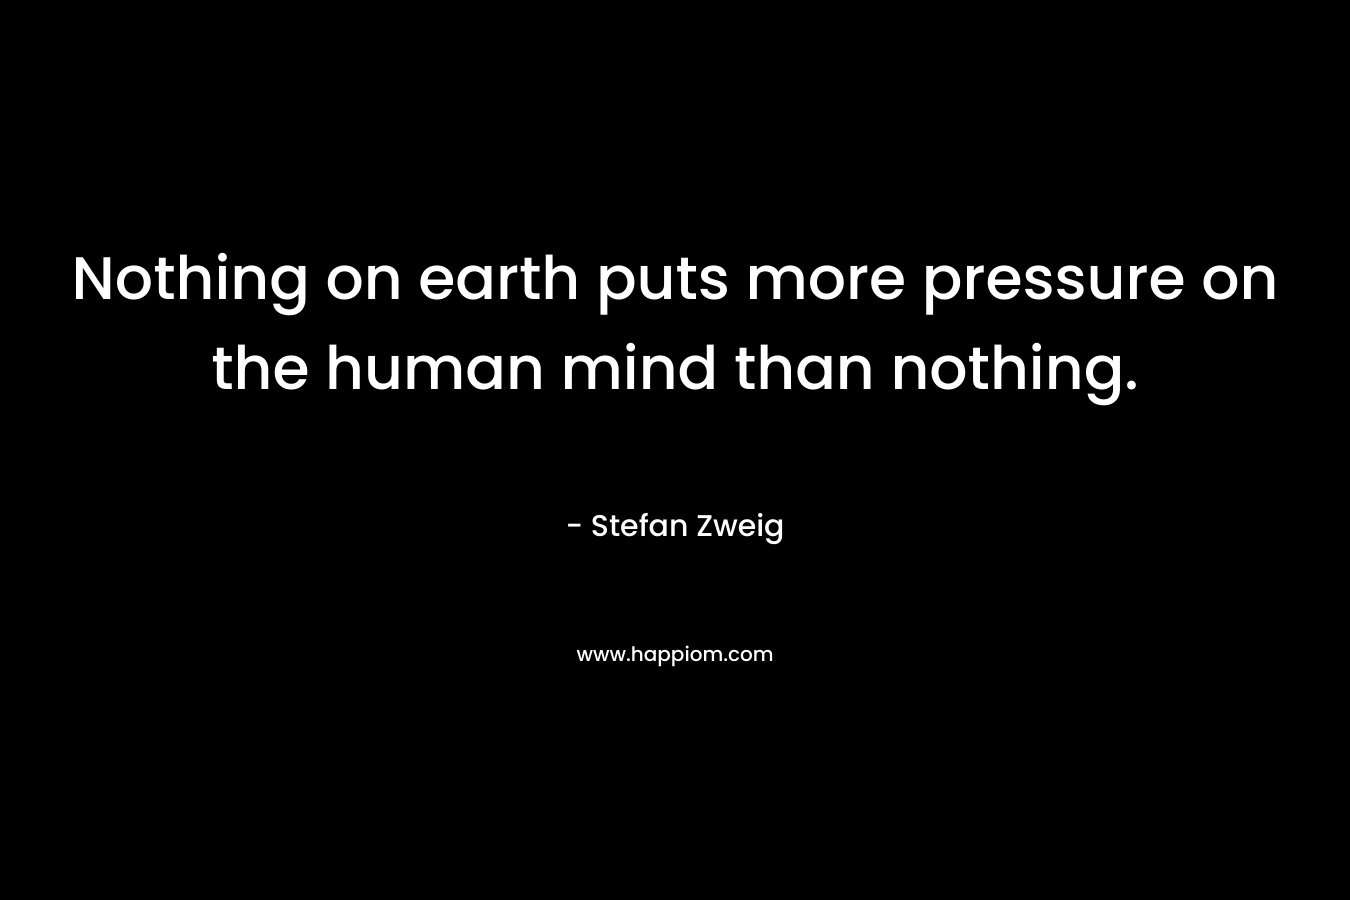 Nothing on earth puts more pressure on the human mind than nothing.